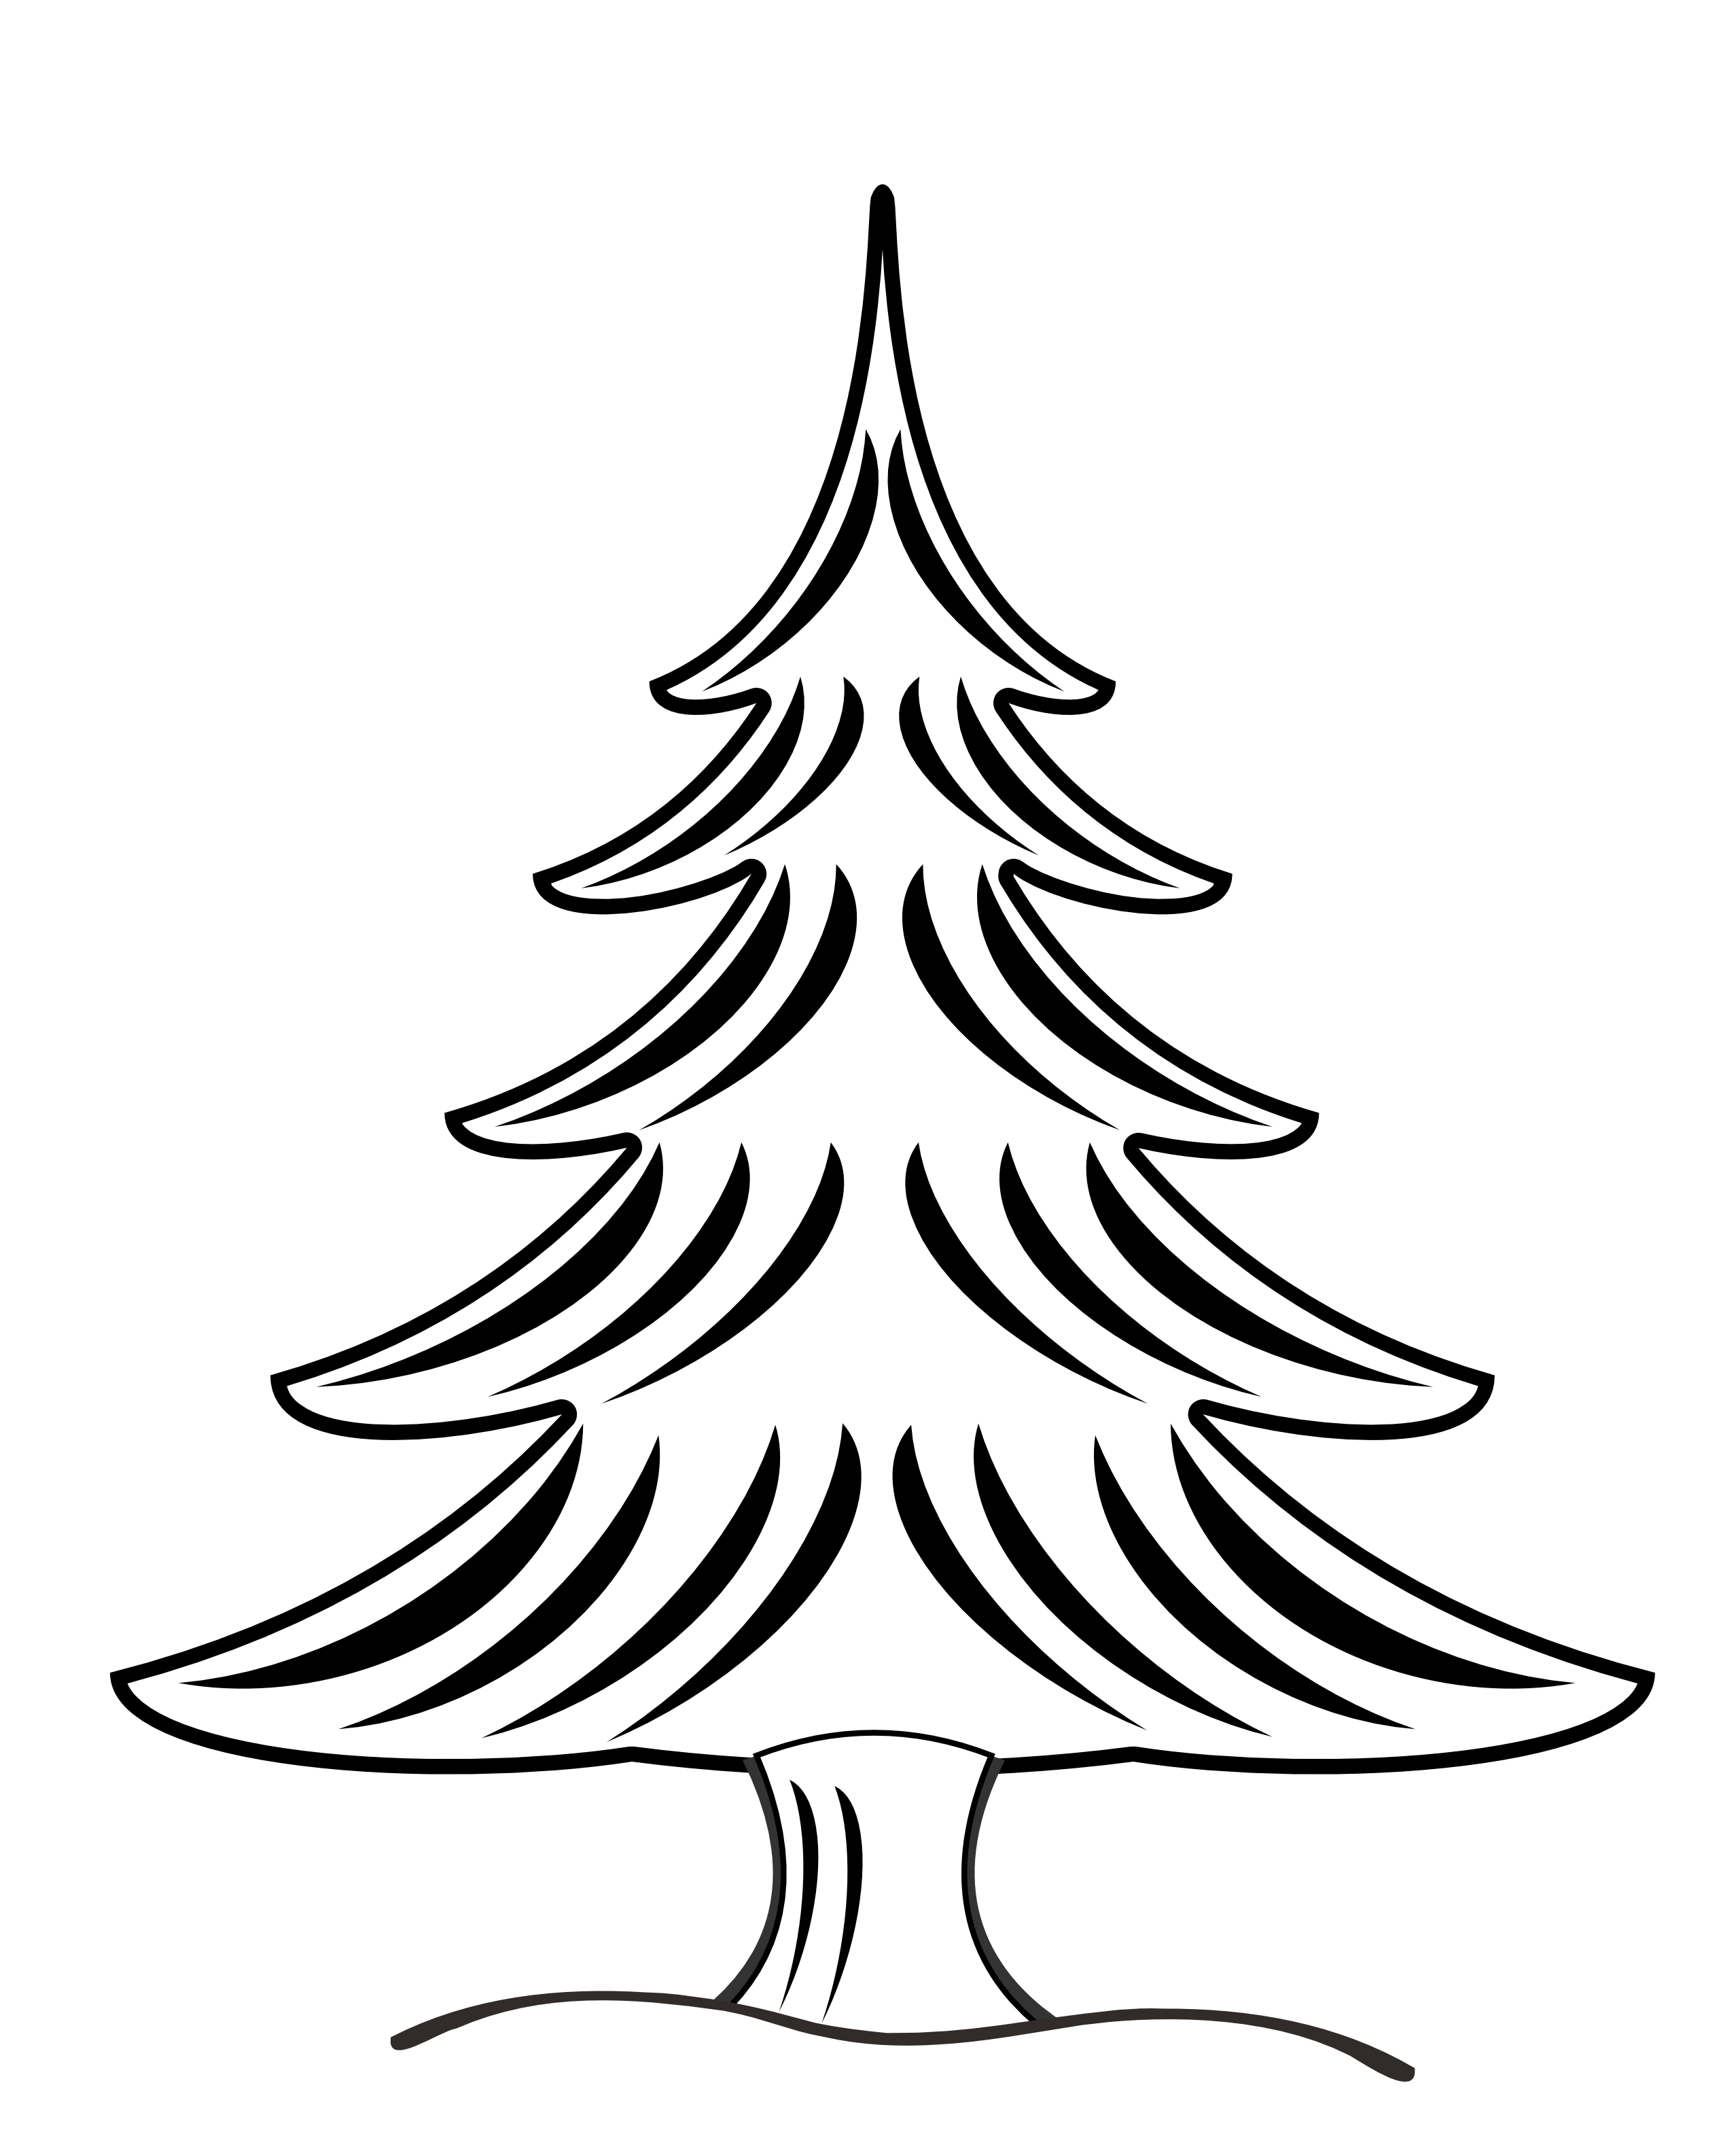 office cleaning clipart black and white tree